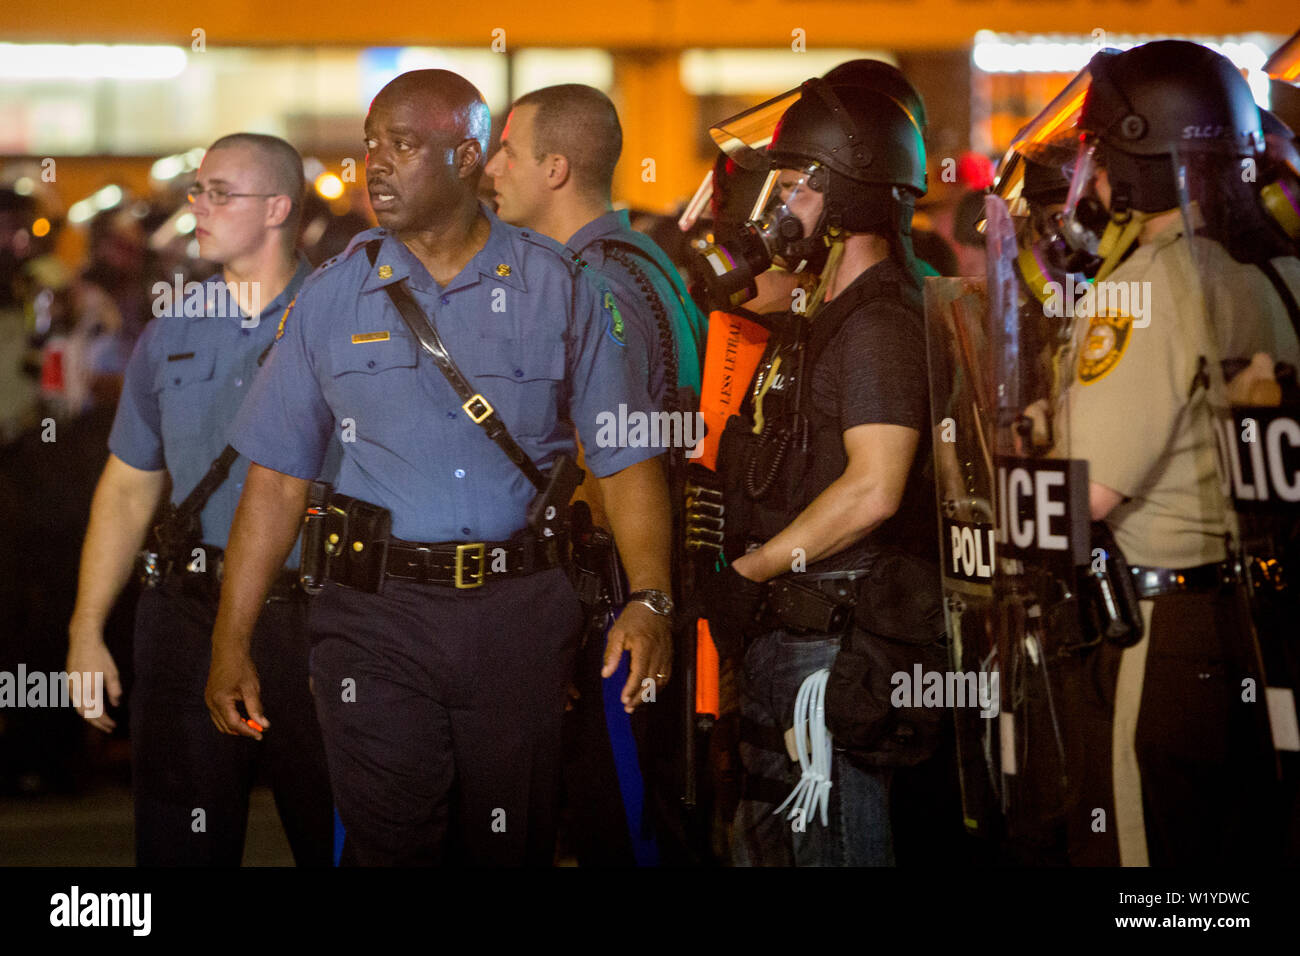 Captain Ronald Johnson of the Missouri State Highway Patrol walks and talks with the protesters in an attempt to de-escalate the tensions following the riots and protests after the killing of Michael Brown. Stock Photo